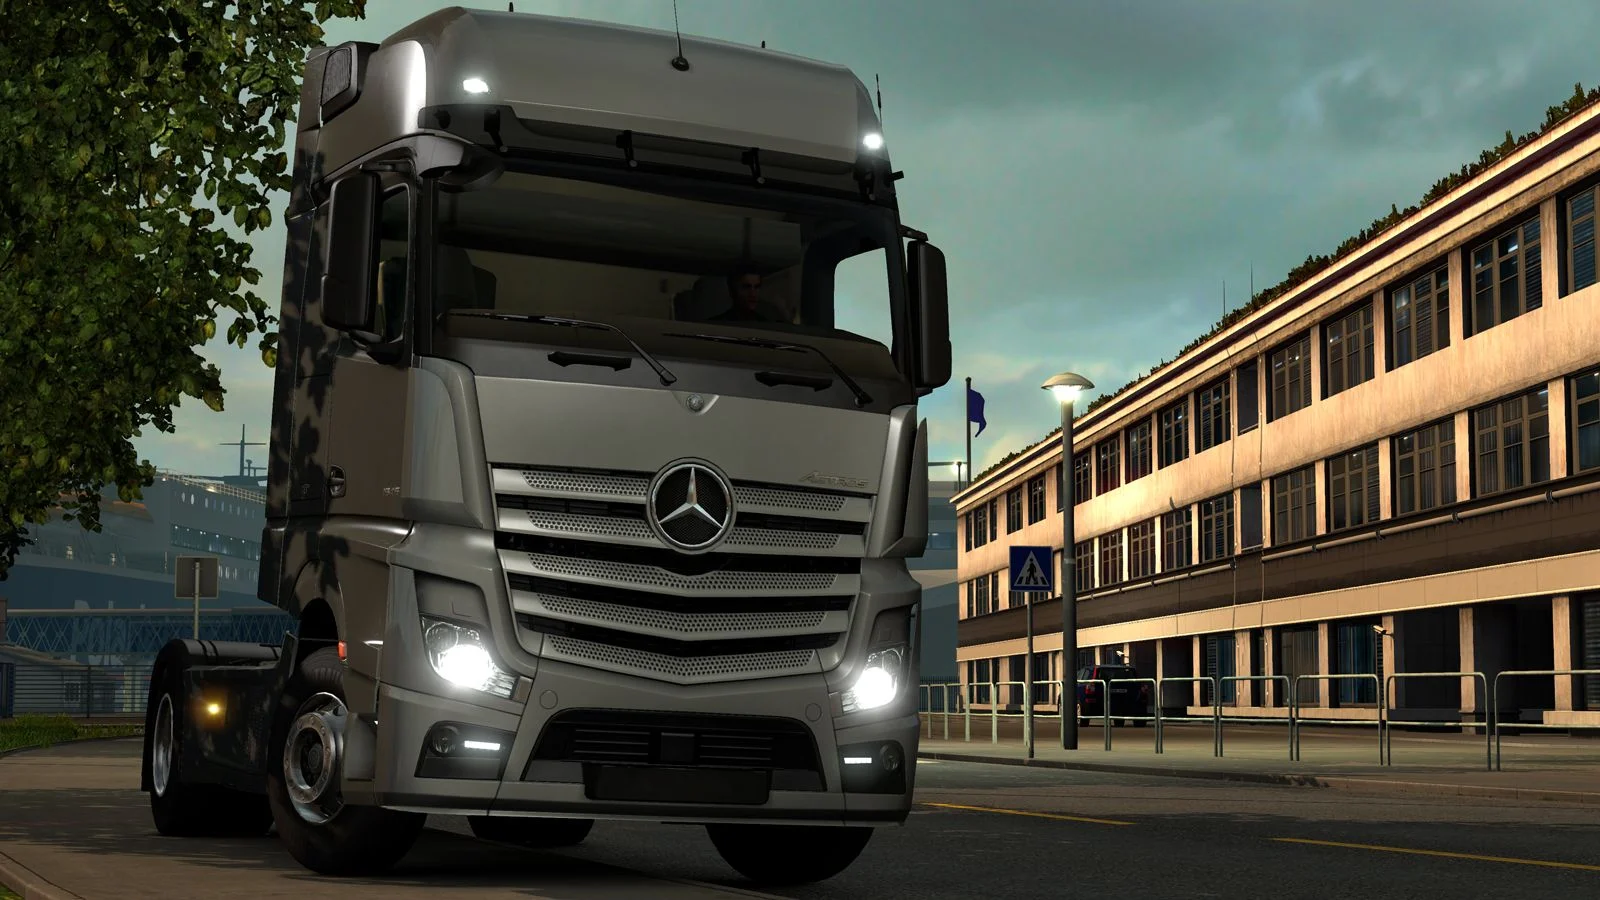 Euro Truck Simulator 2 will receive new system requirements